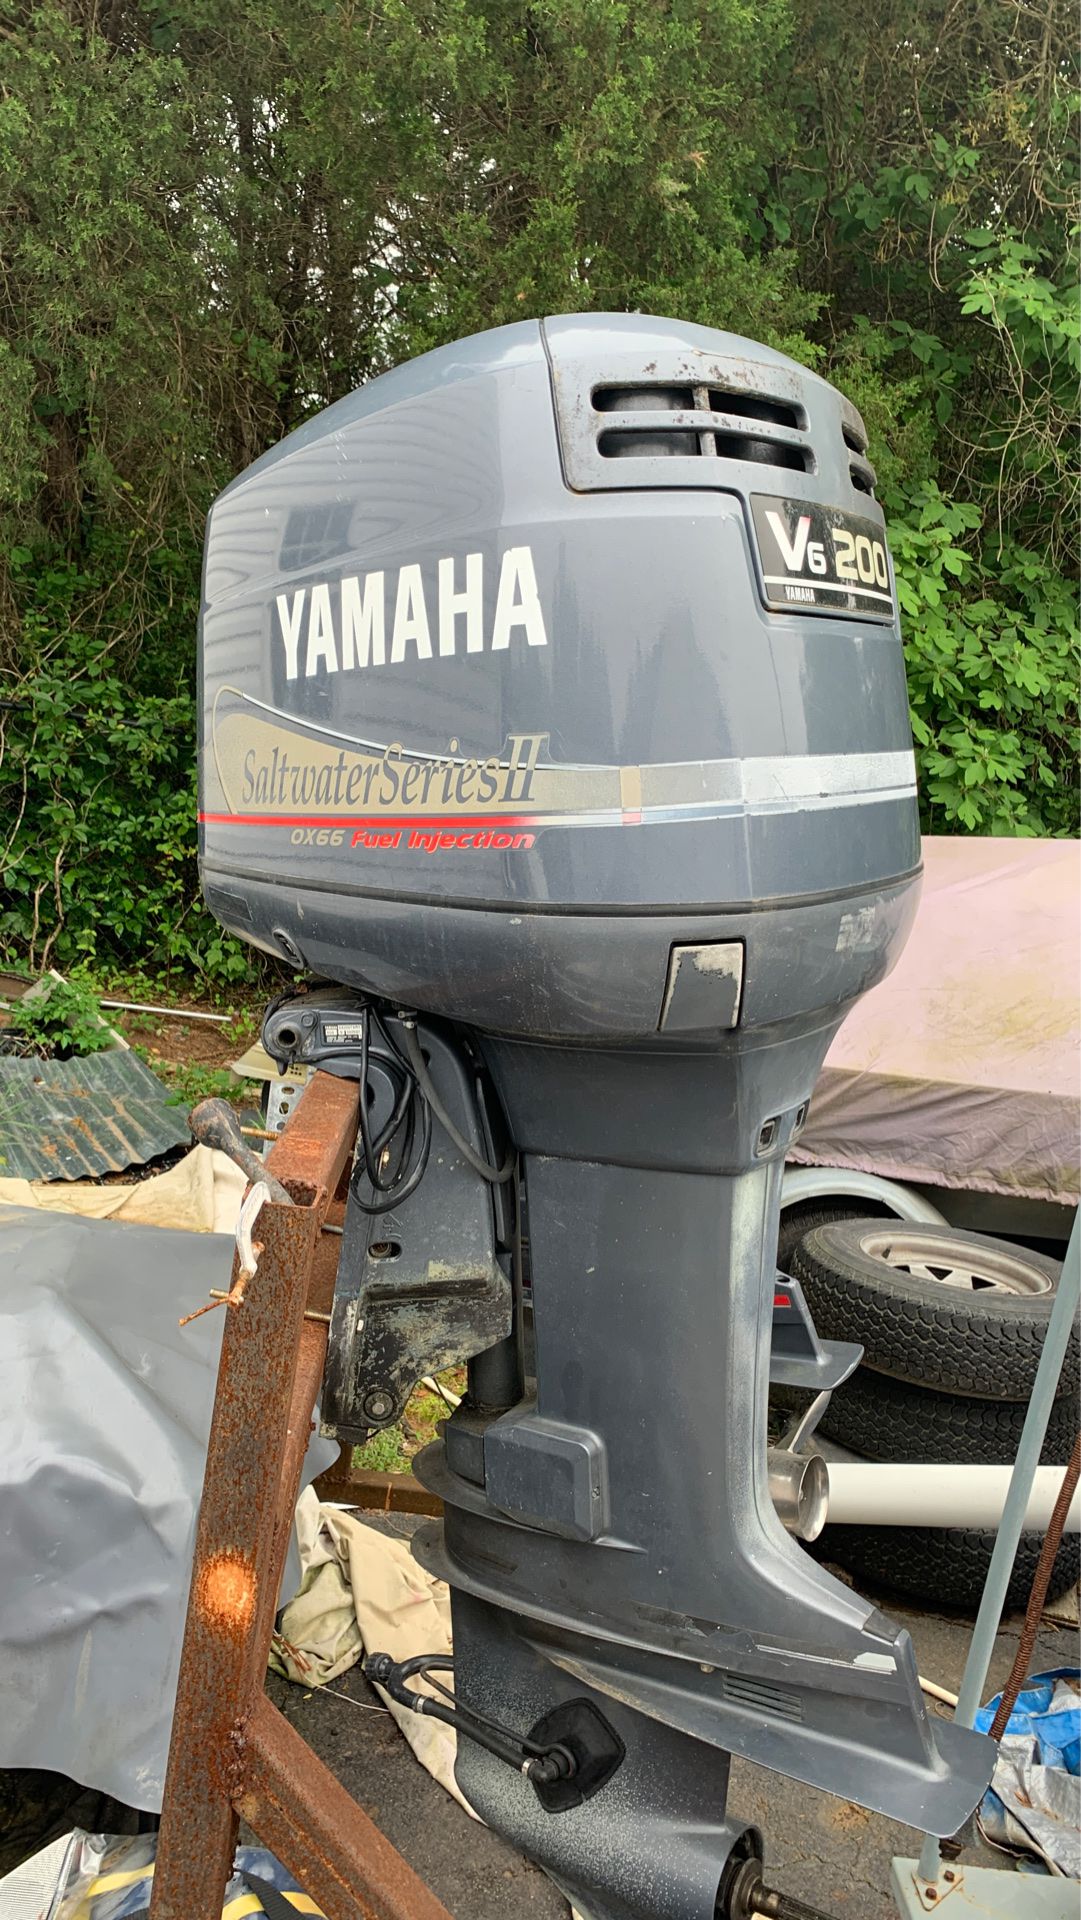 Yamaha outboards 200hp saltwater series 2